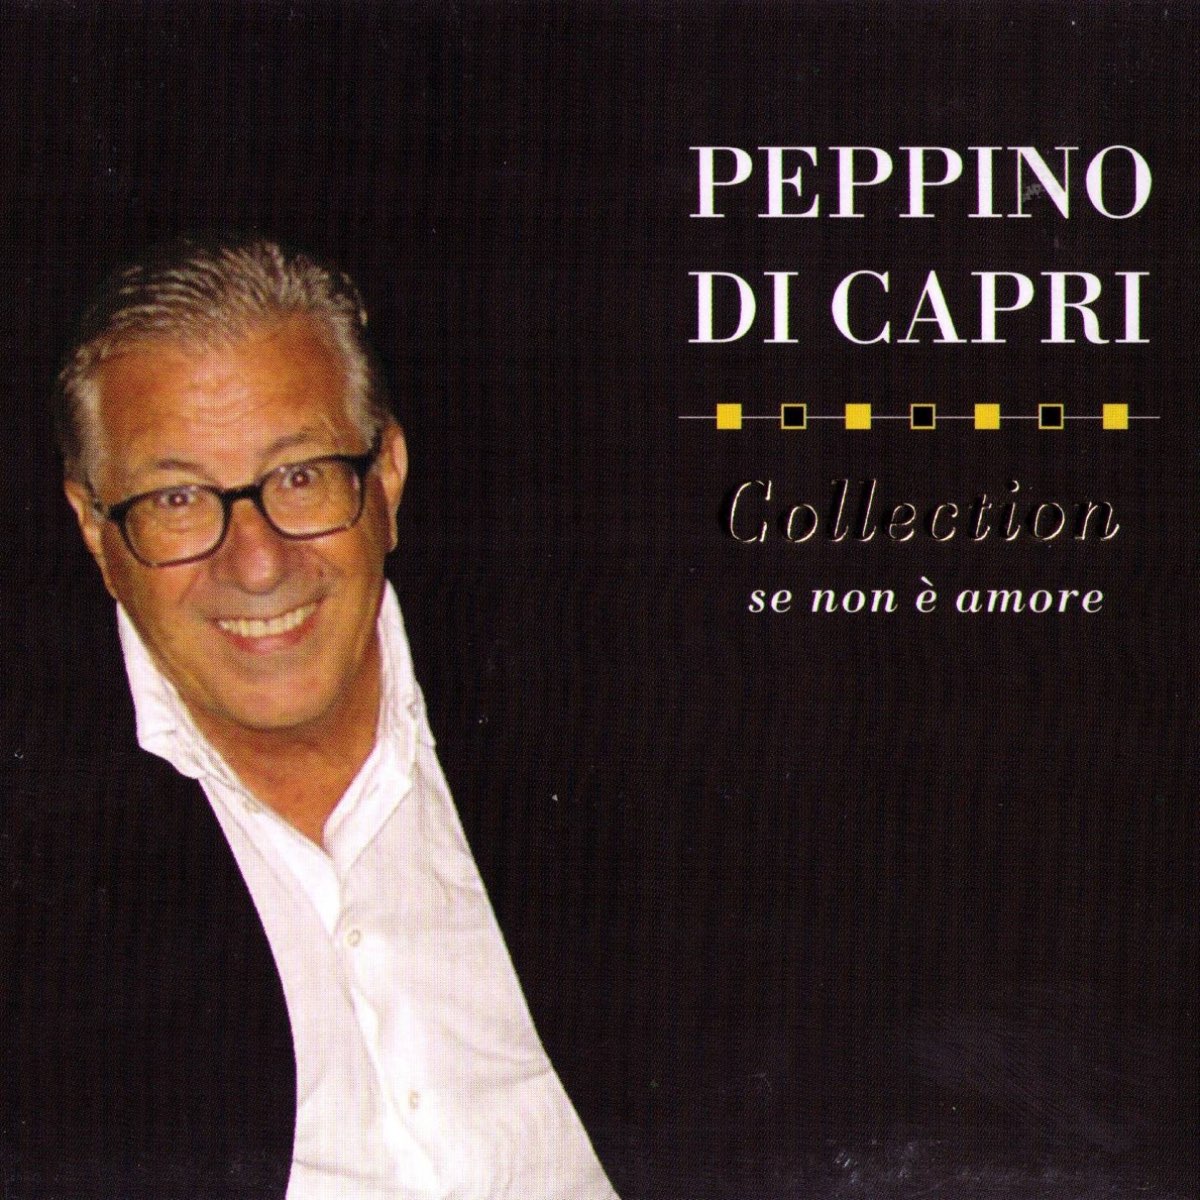 Se collection. Peppino. Capri Songs. Peppino PNG.